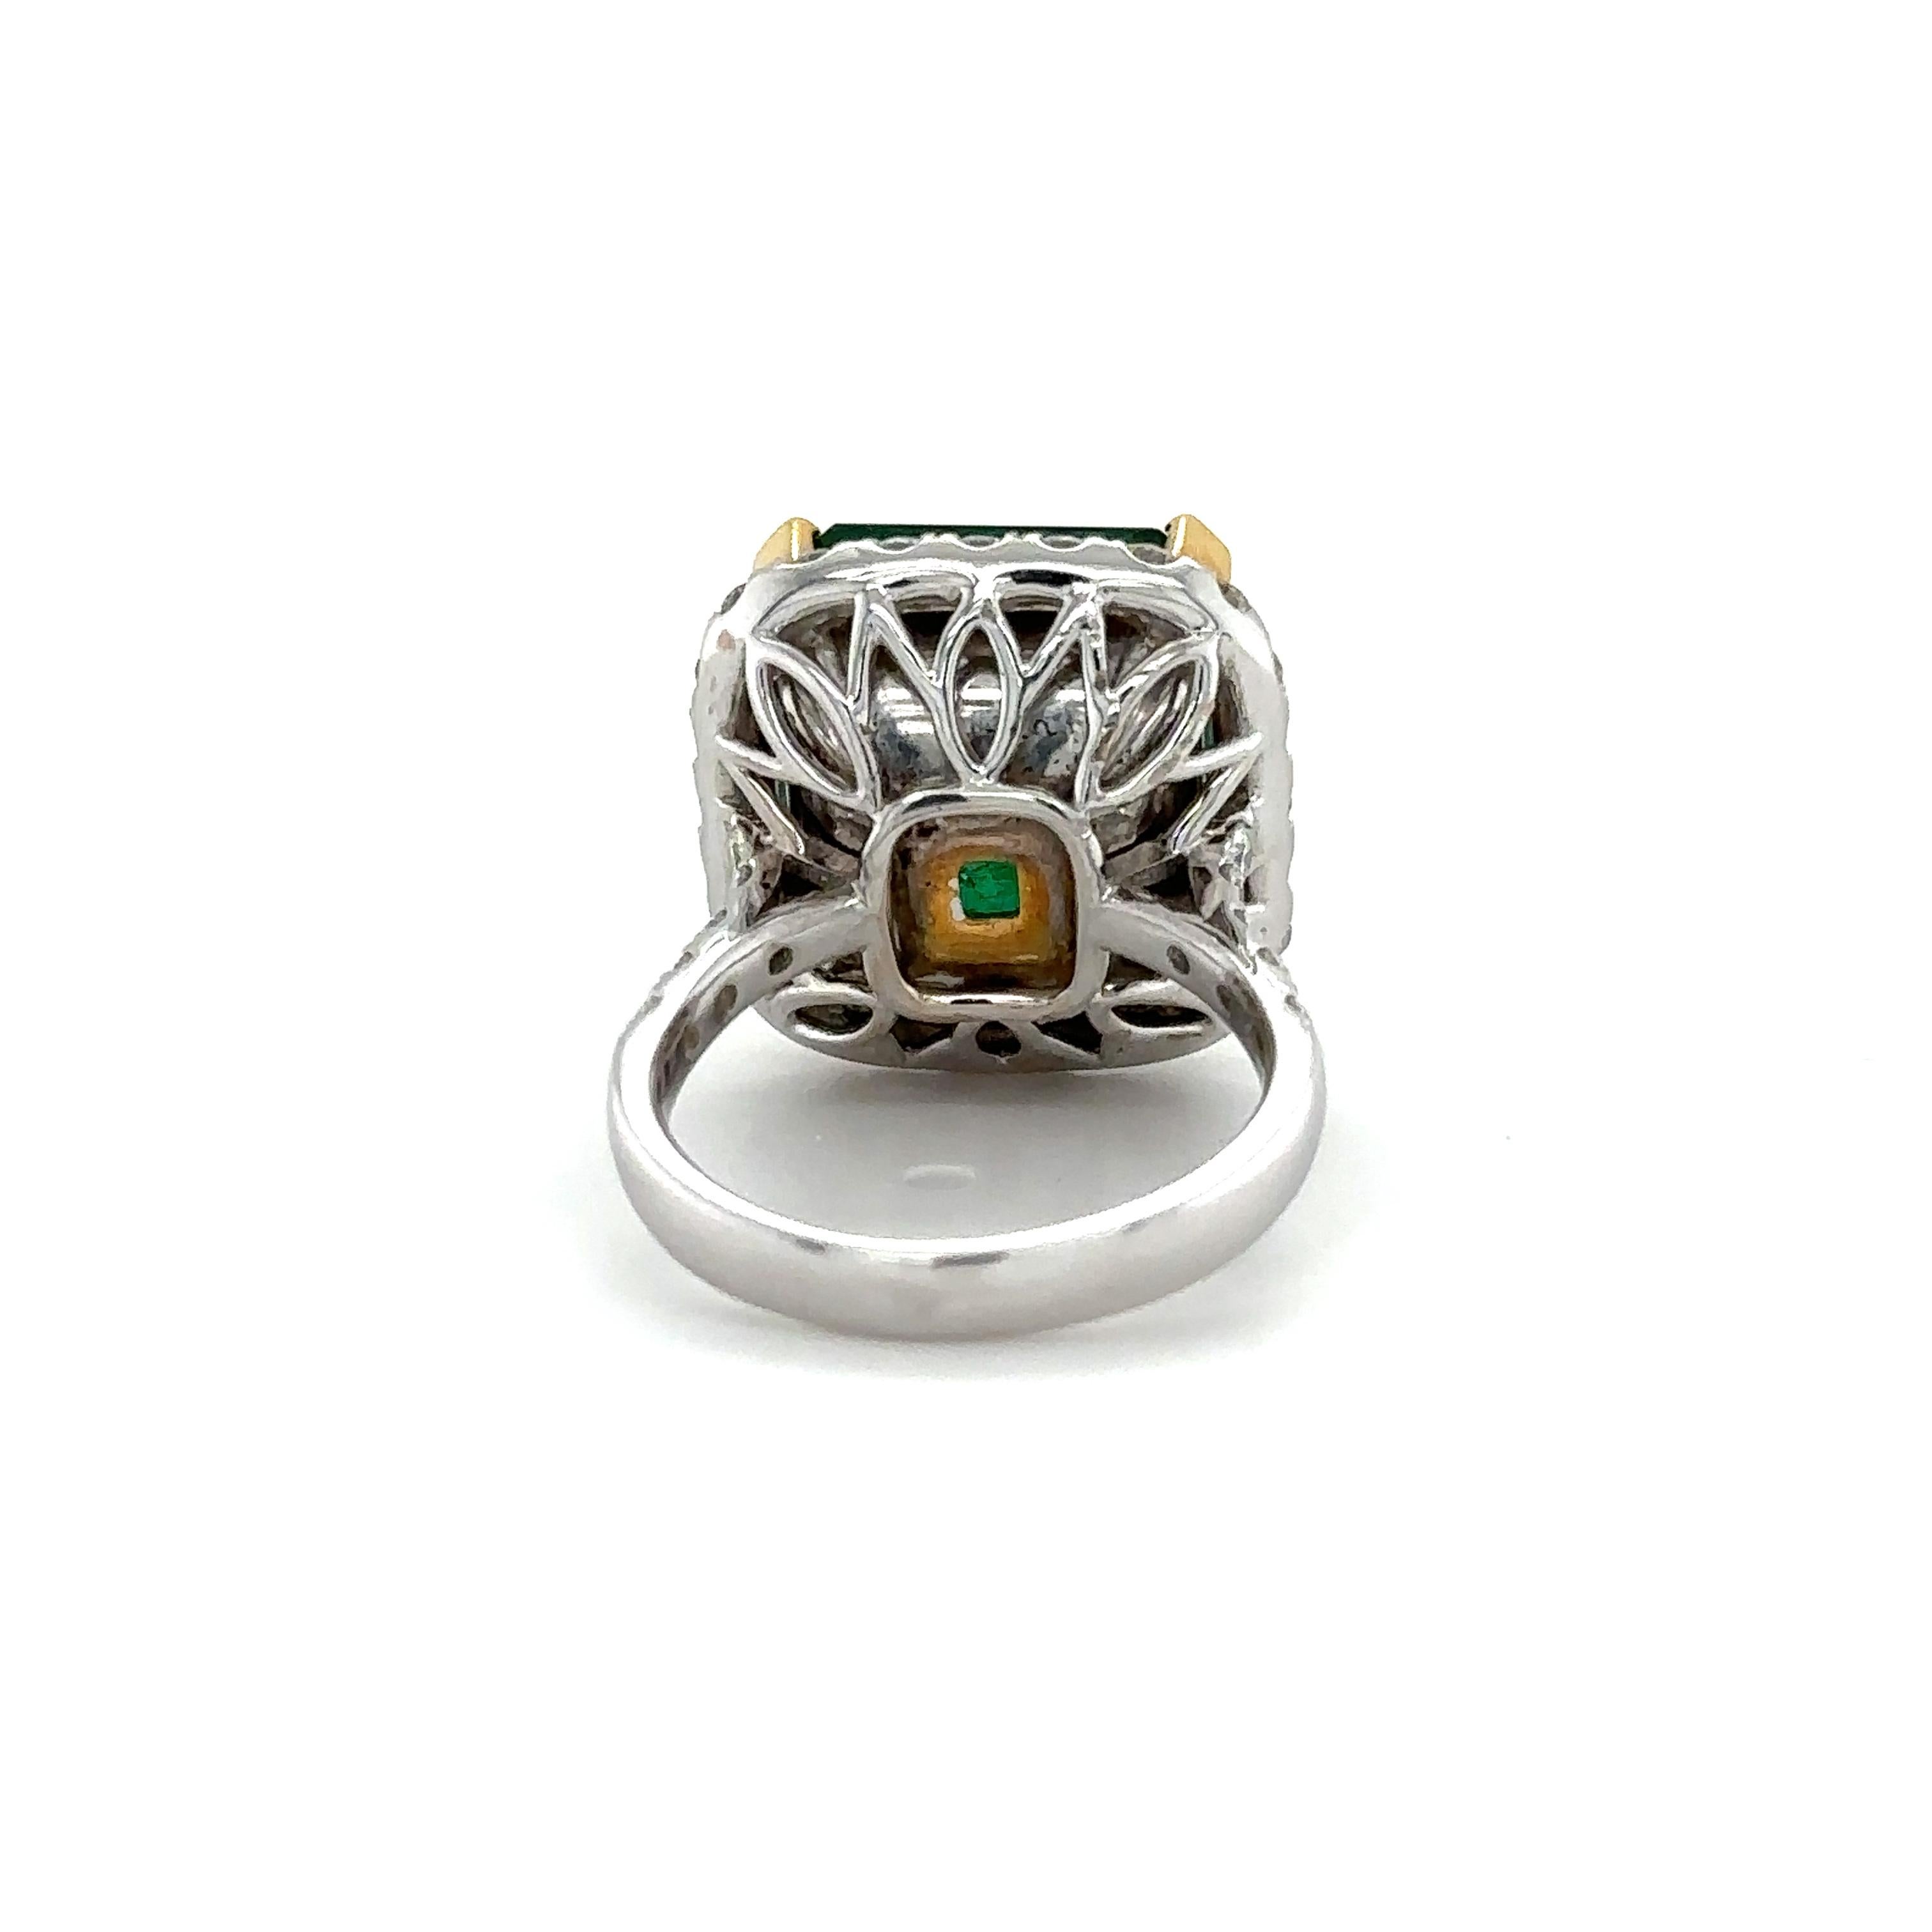 This breathtakingly beautiful ring is a true masterpiece, made from a combination of 18k white and yellow gold, this ring features a stunning 10.93ct Emerald-cut Zambian Emerald at its center. The Emerald is a true standout, with a vivid green color